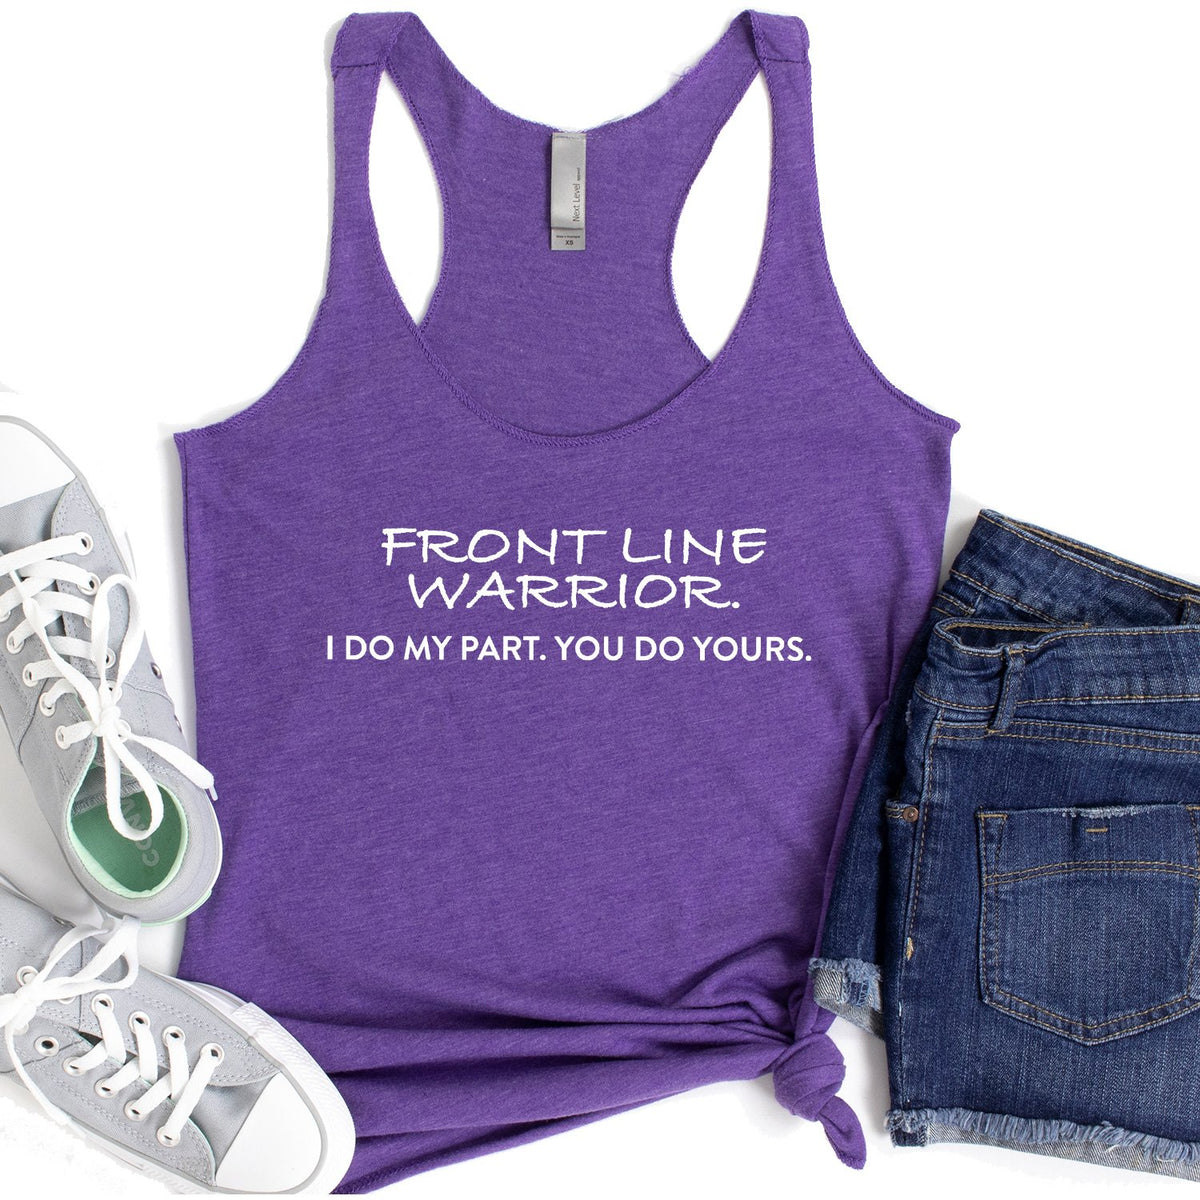 Frontline Warrior I Do My Part You Do Yours - Tank Top Racerback